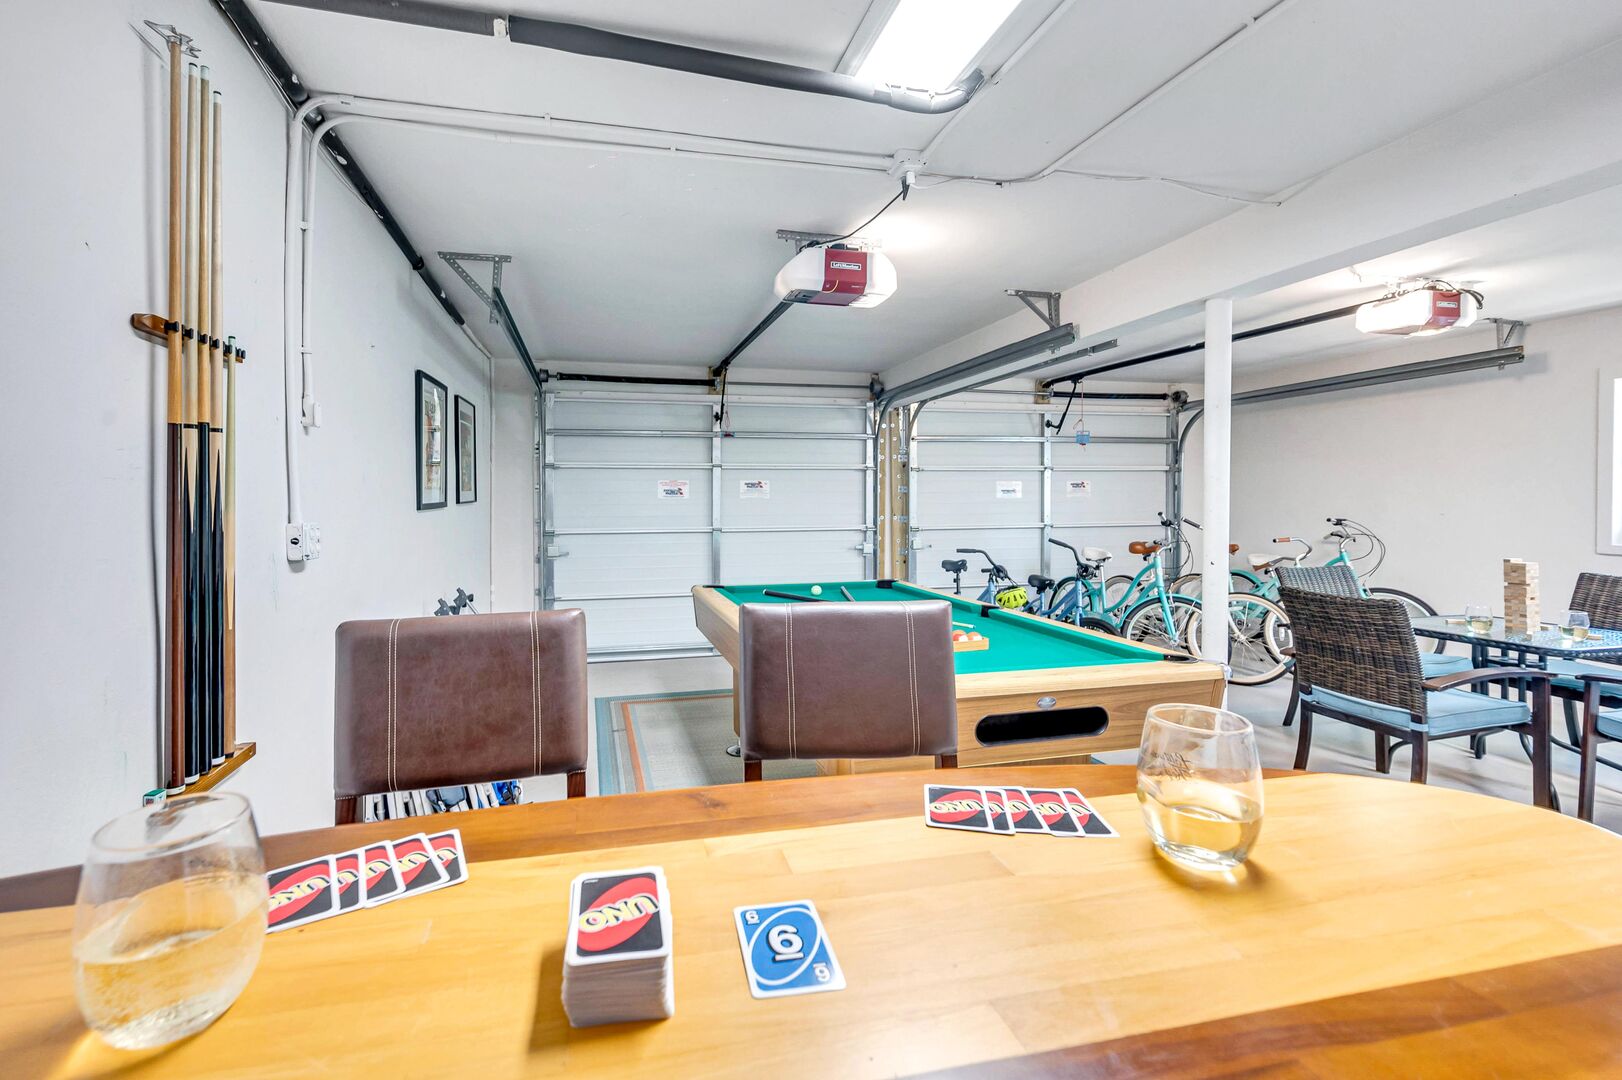 Enjoy a fun game of pool, bean bag toss or board games in the game room.